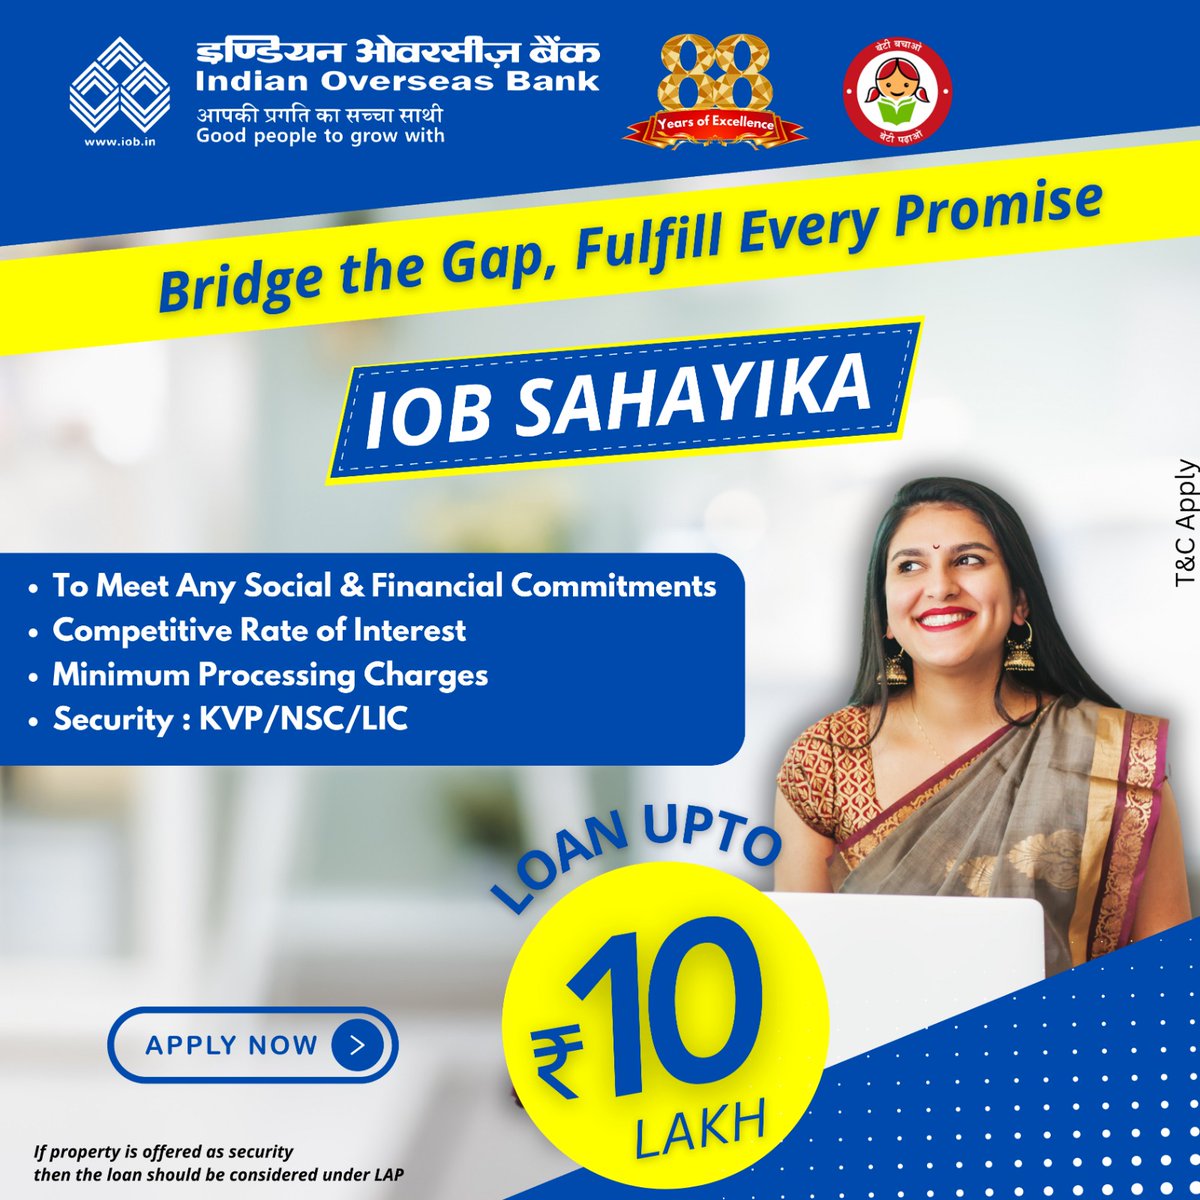 Transform your investments into opportunities with IOB's Sahayika loan against KVP, NSC, and LIC securities. Bridge the gap between opportunity and financial need, today!!! #IOBSahayikaLoan #IOB #IndianOverseasBank #DFS #RBI #licpolicy #kisanvikaspatra #Nationalsavingscertificate